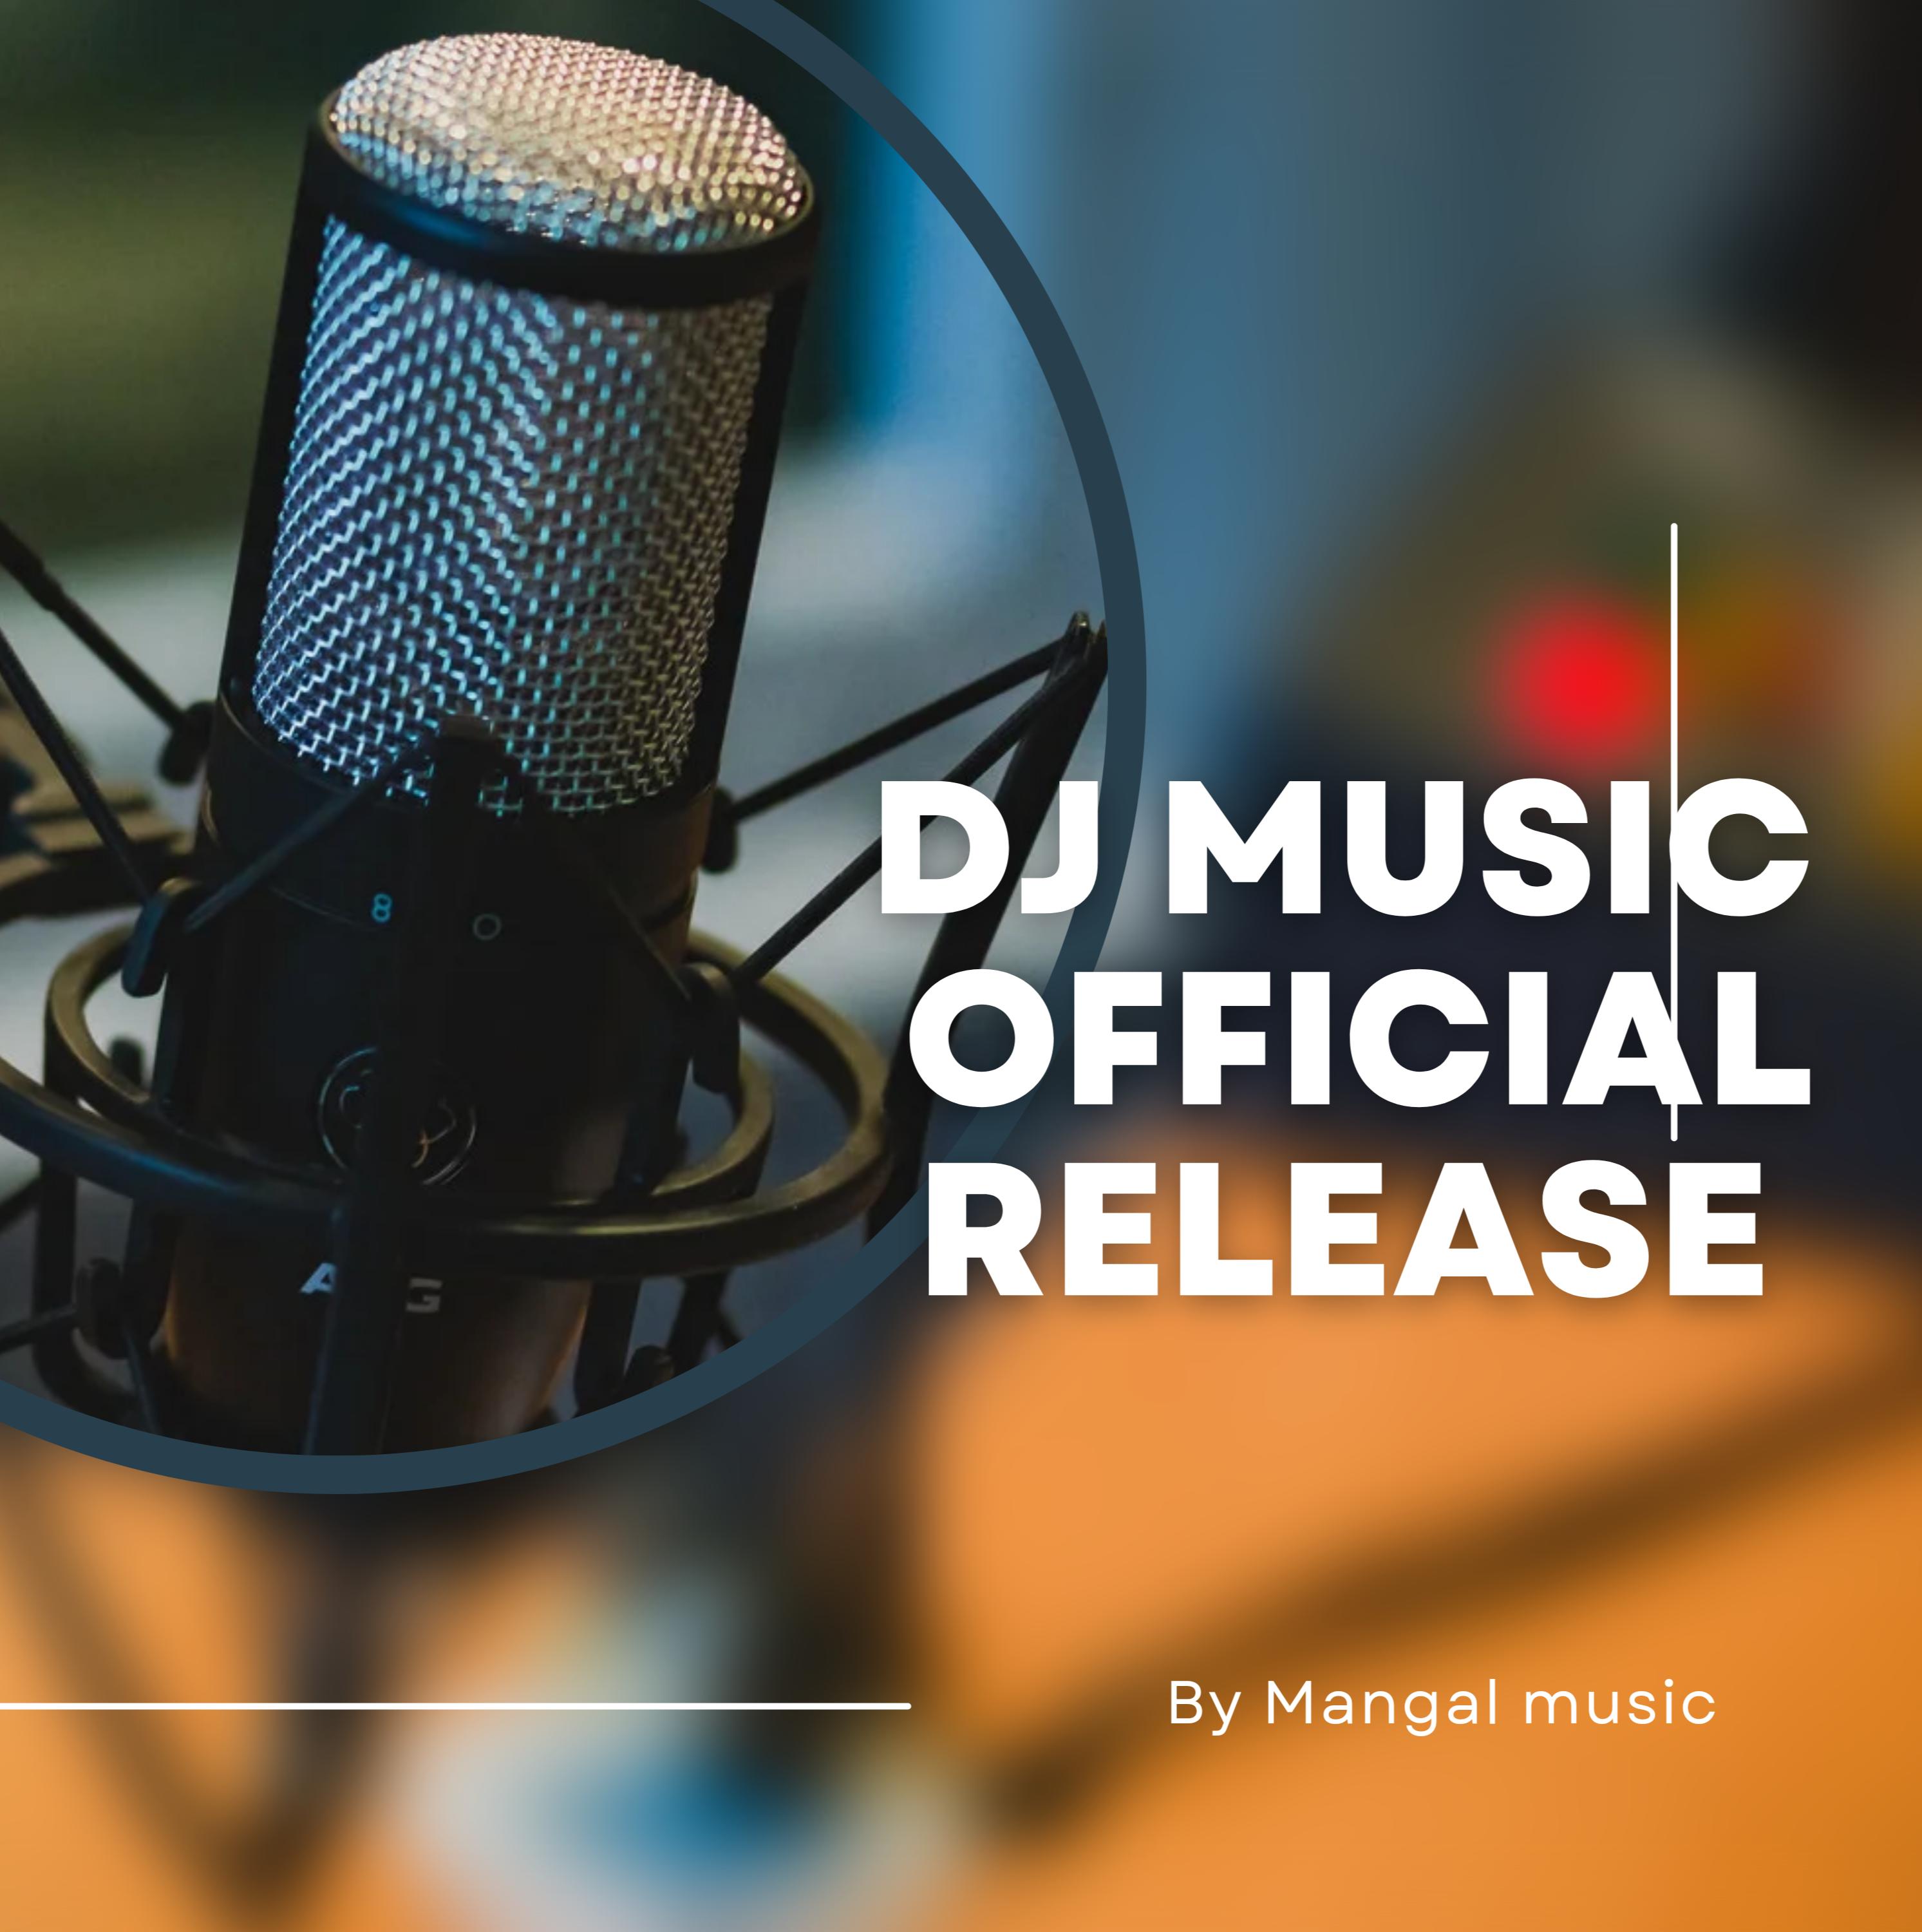 DJ MUSIC OFFICIAL RELEASE 